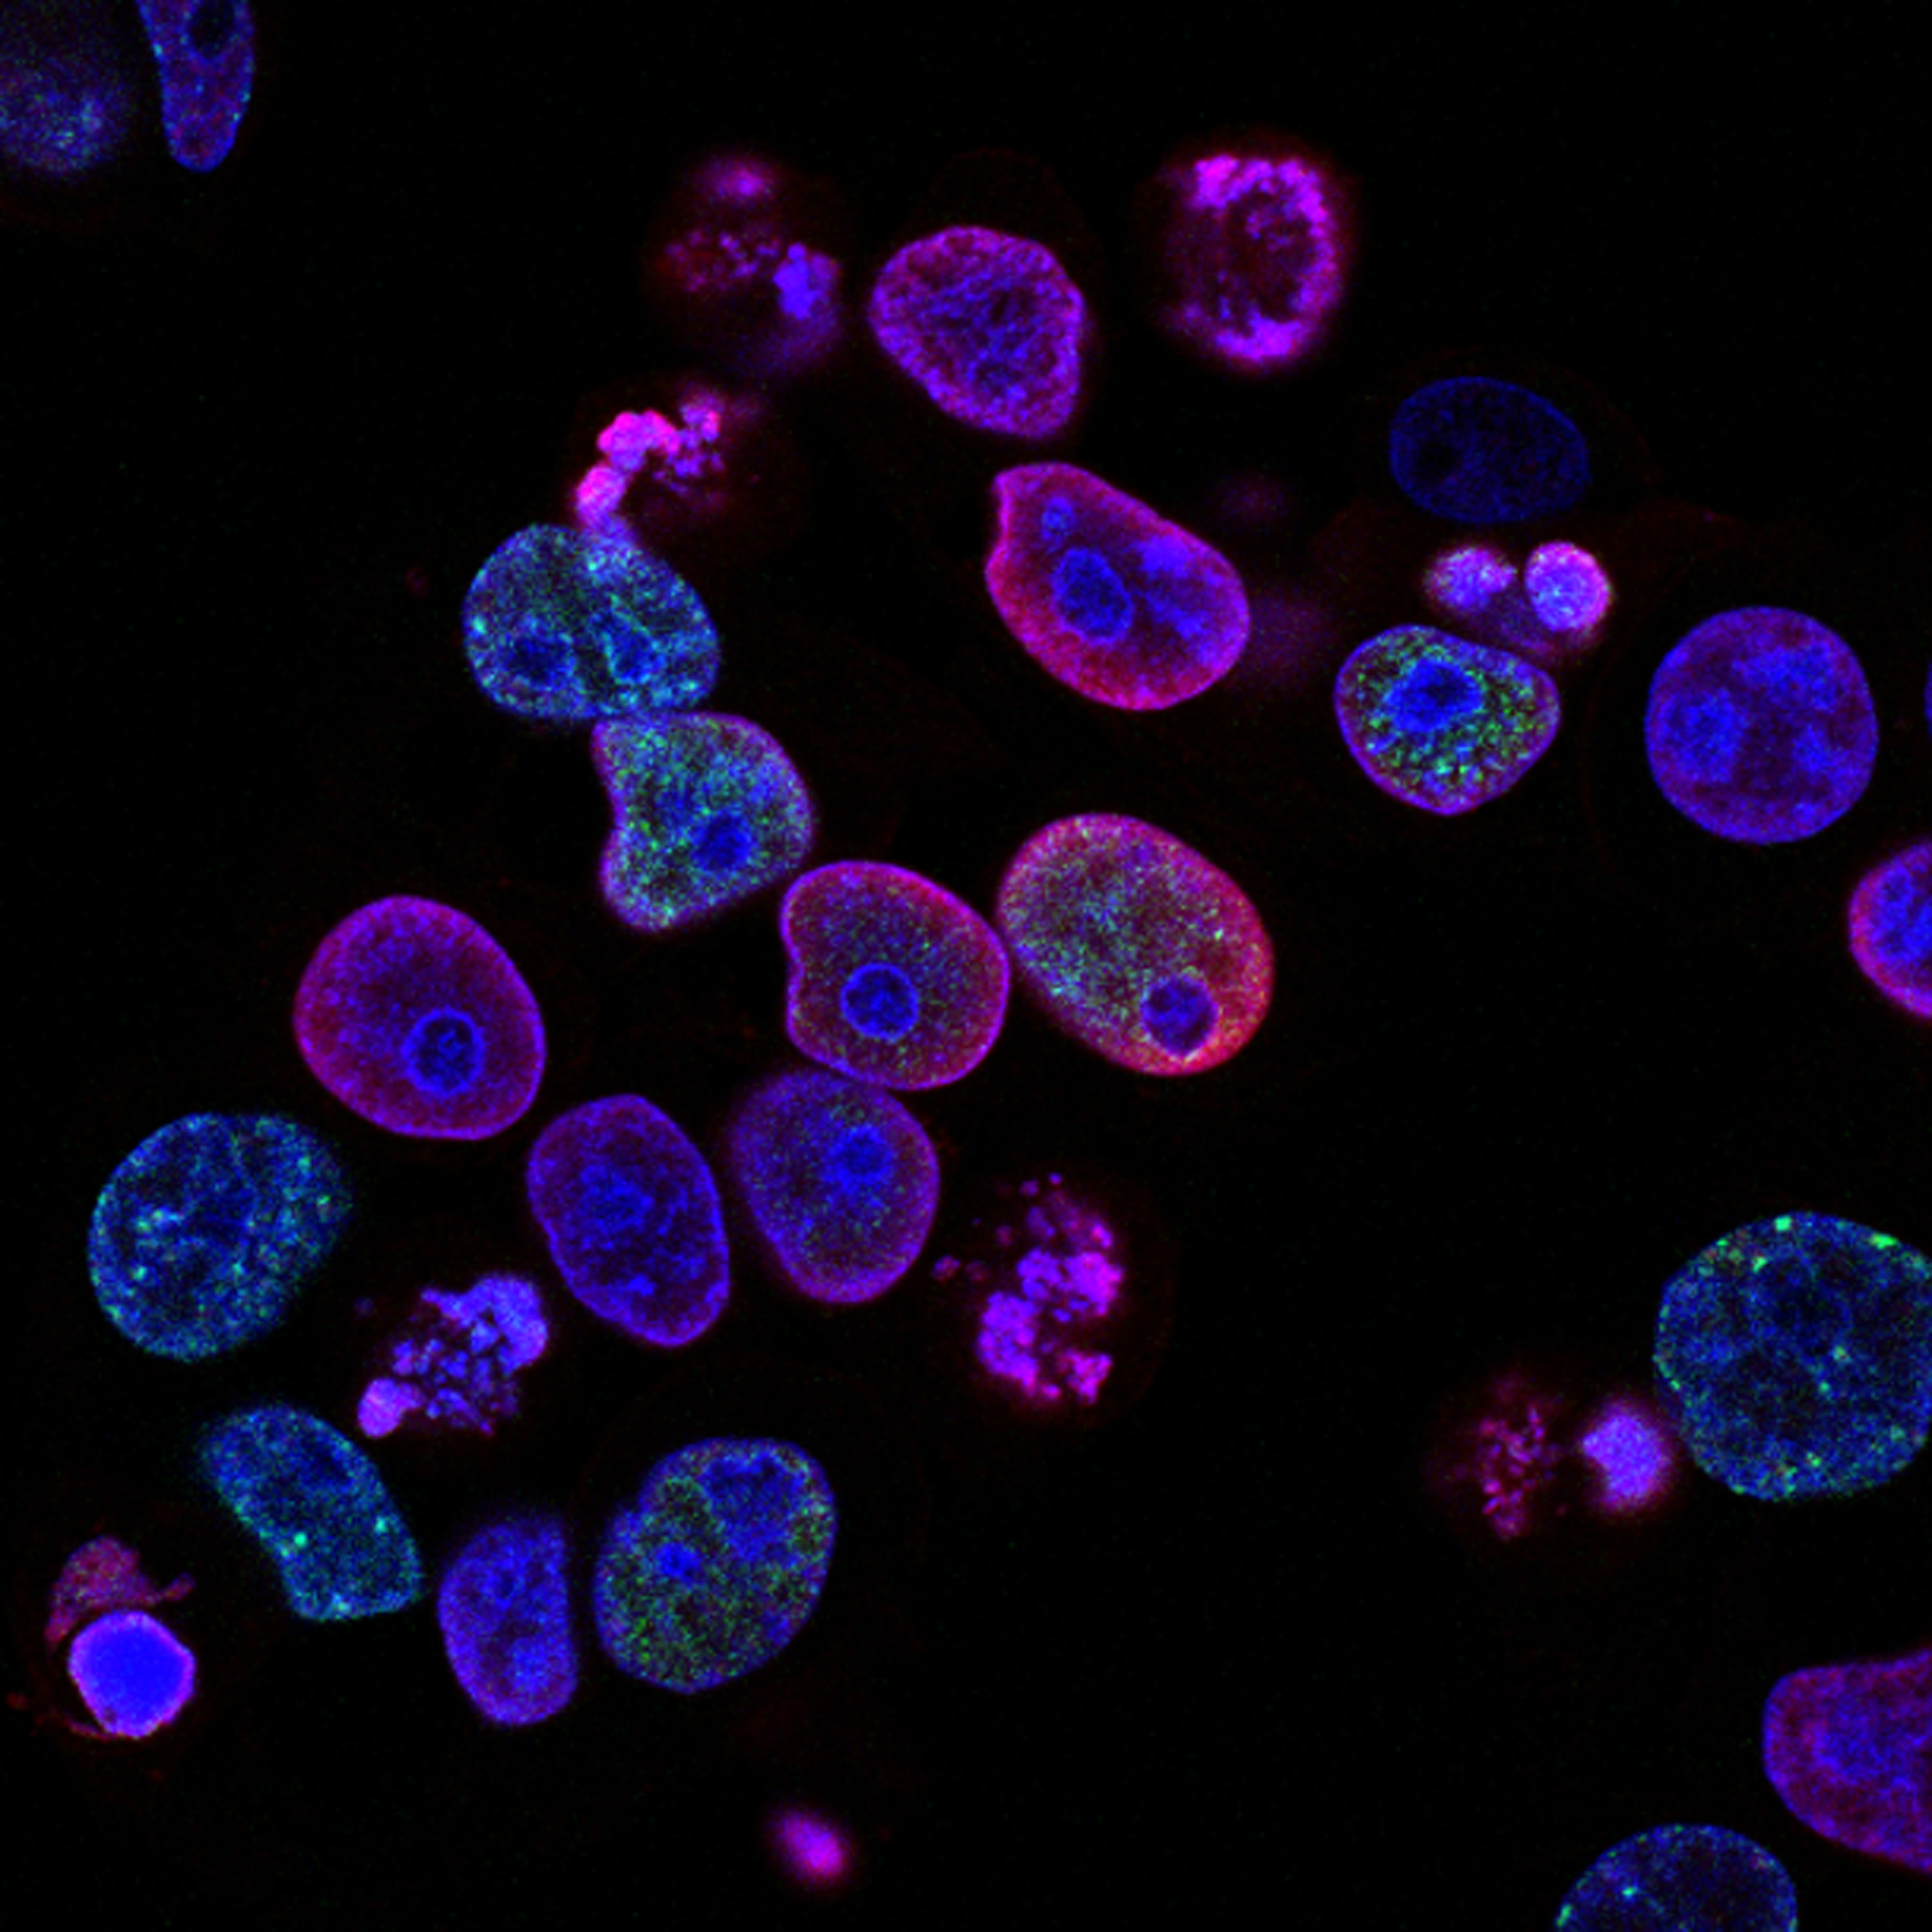 Human colorectal cancer cells